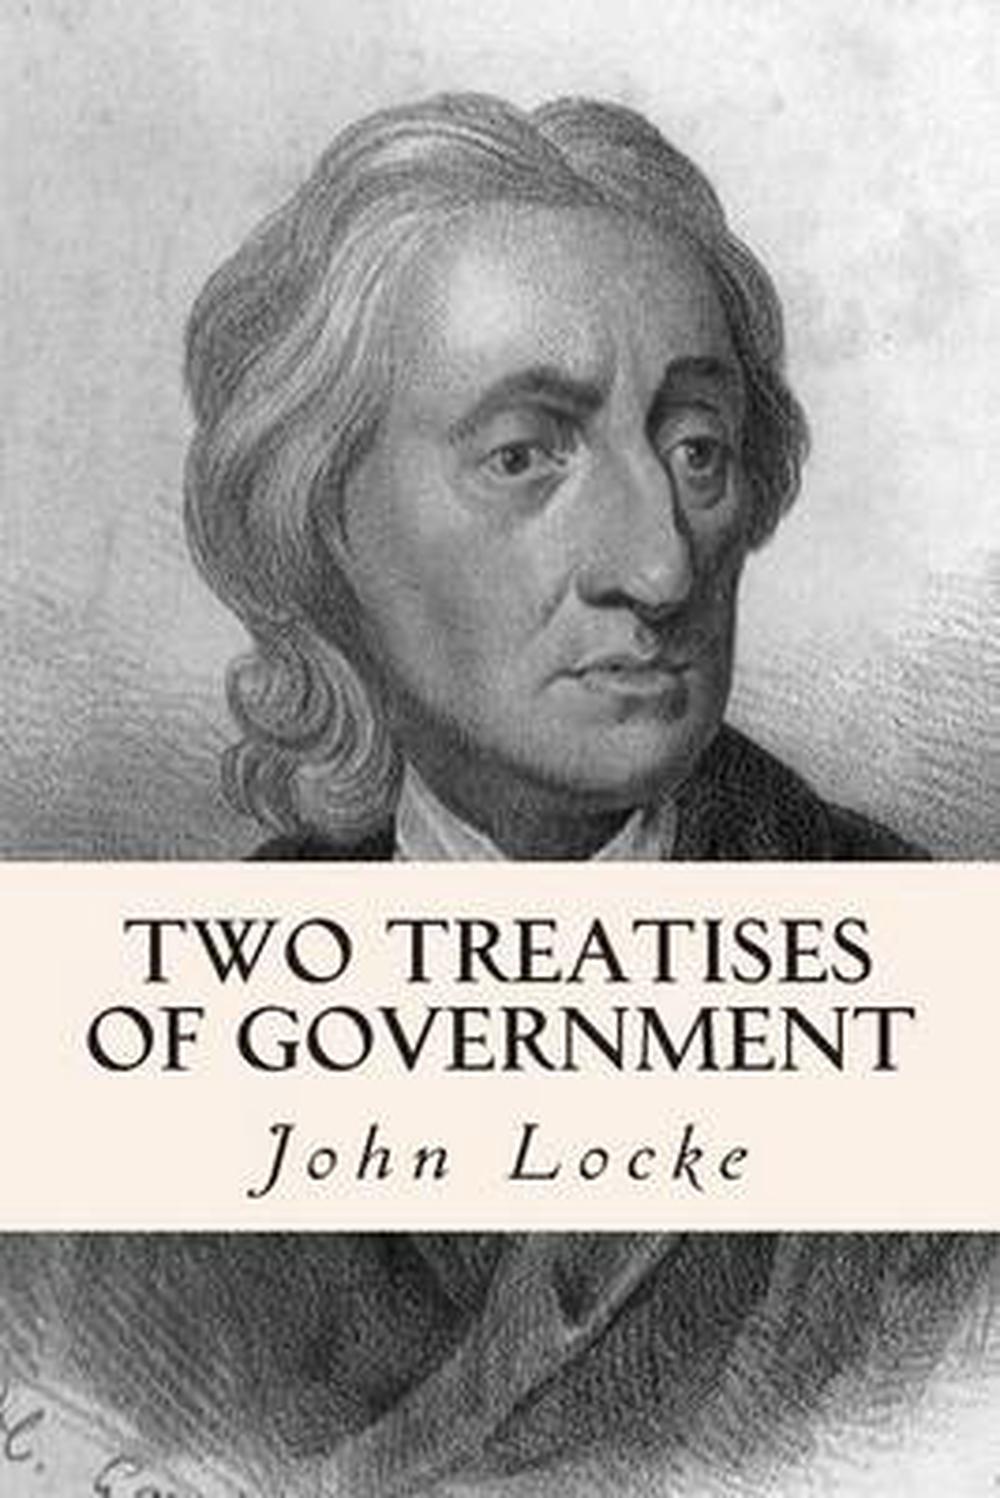 two-treatises-of-government-by-john-locke-english-paperback-book-free-shipping-9781500606886